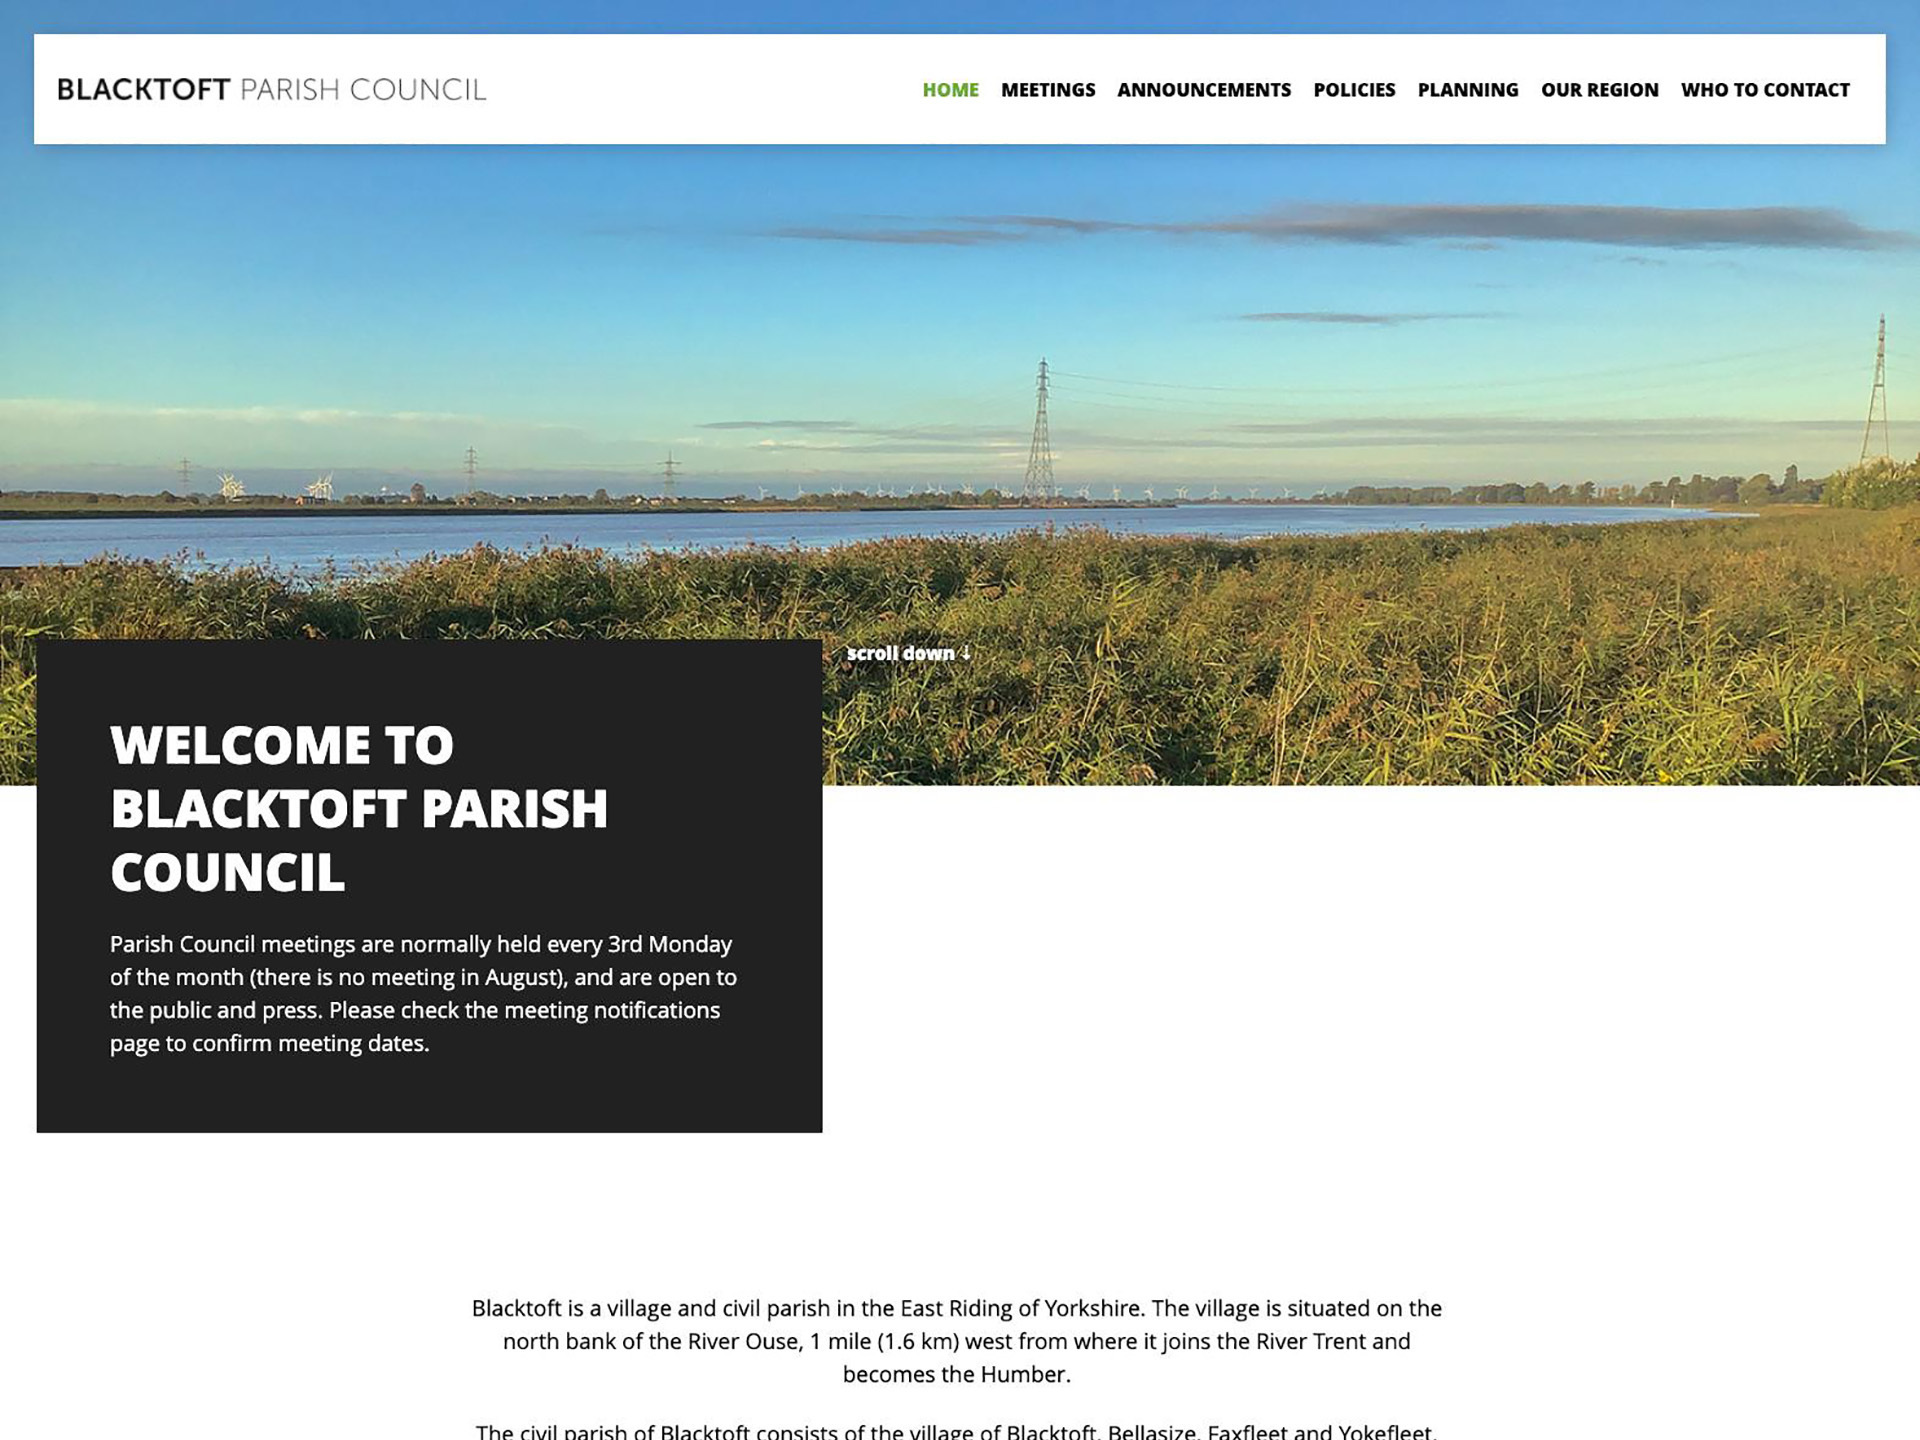 The Blacktoft parish council website, created by it'seeze